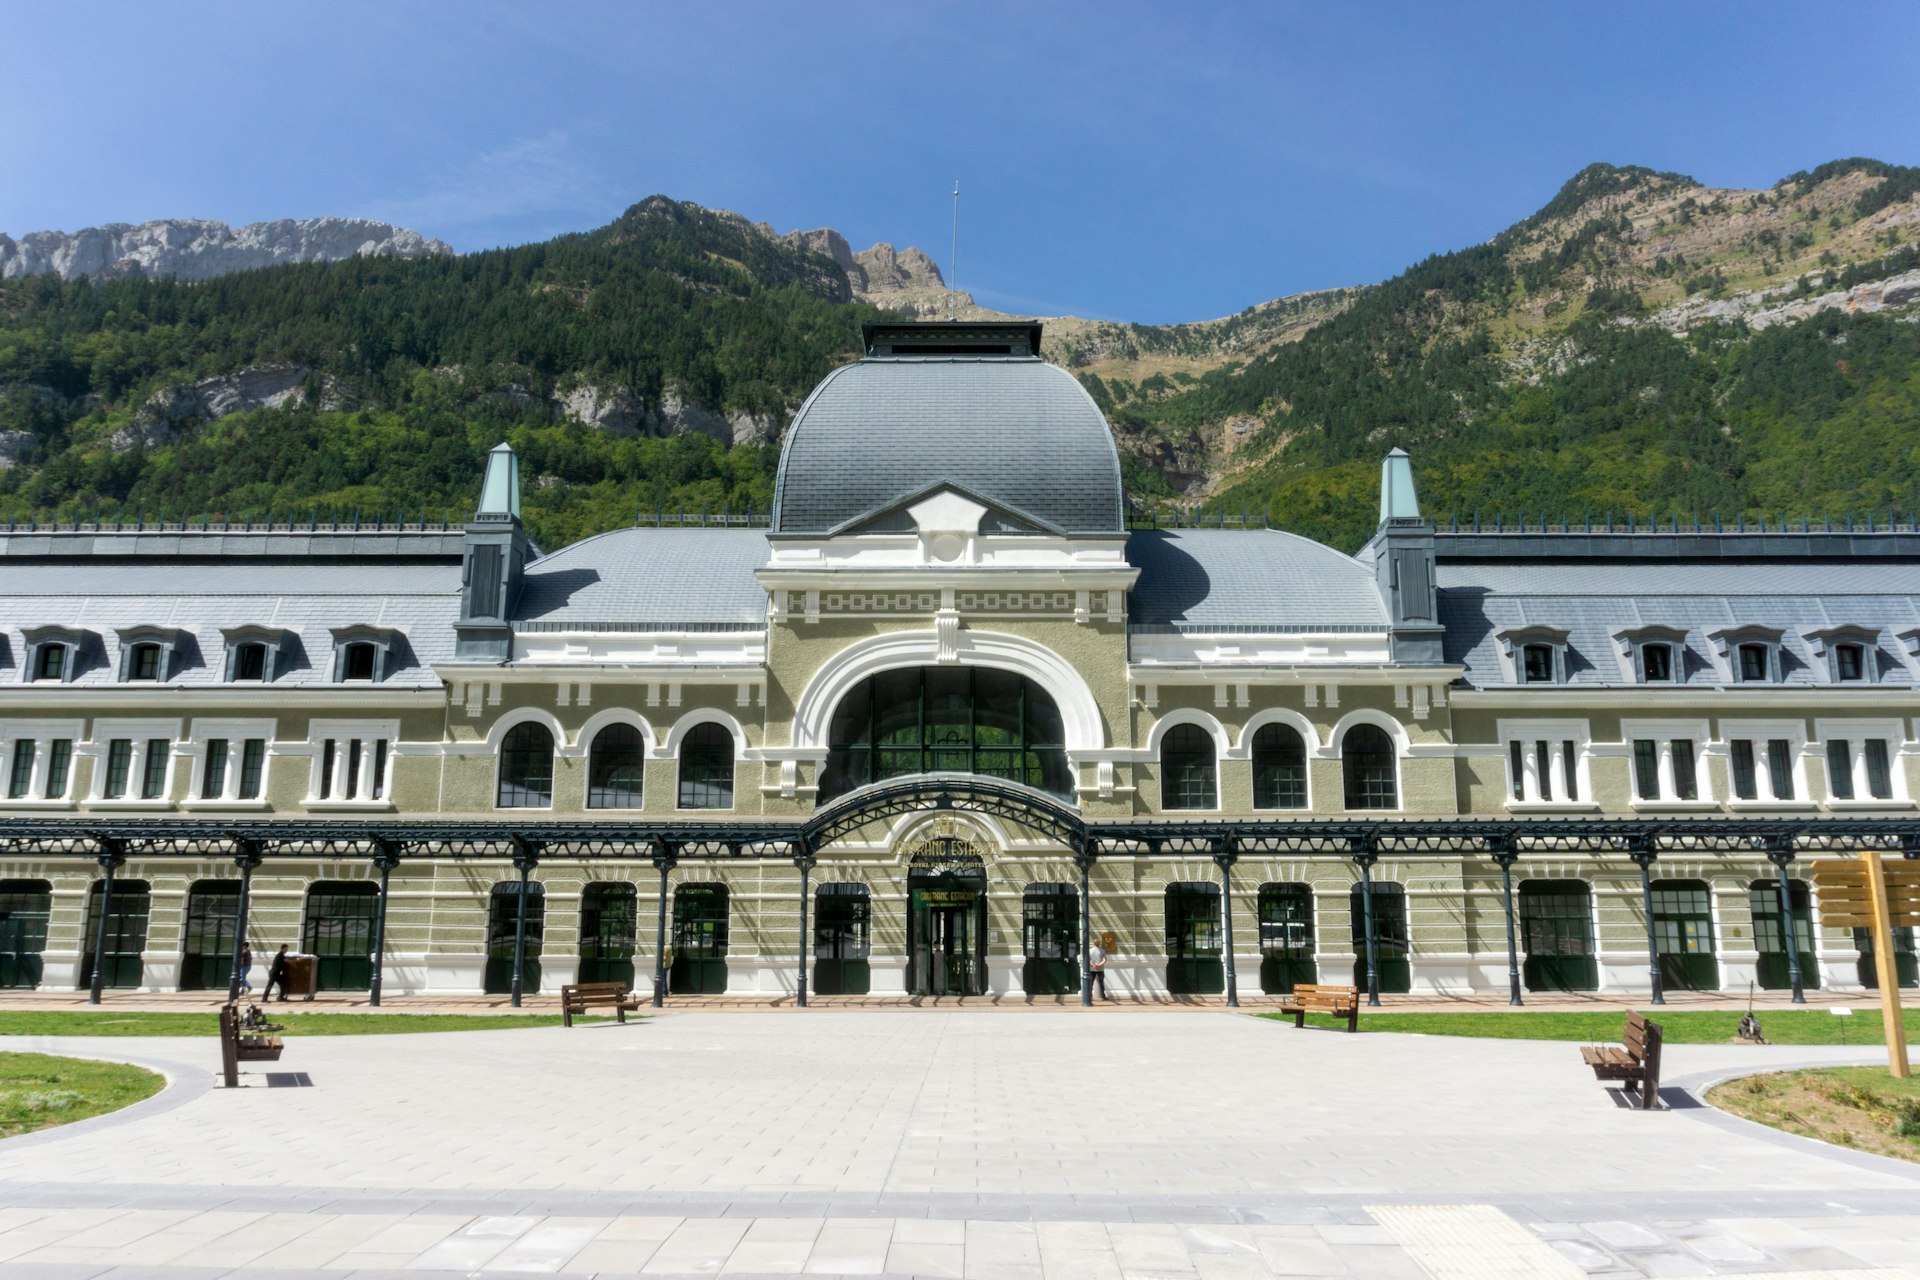 Entrance to the beautiful Canfranc international railway station